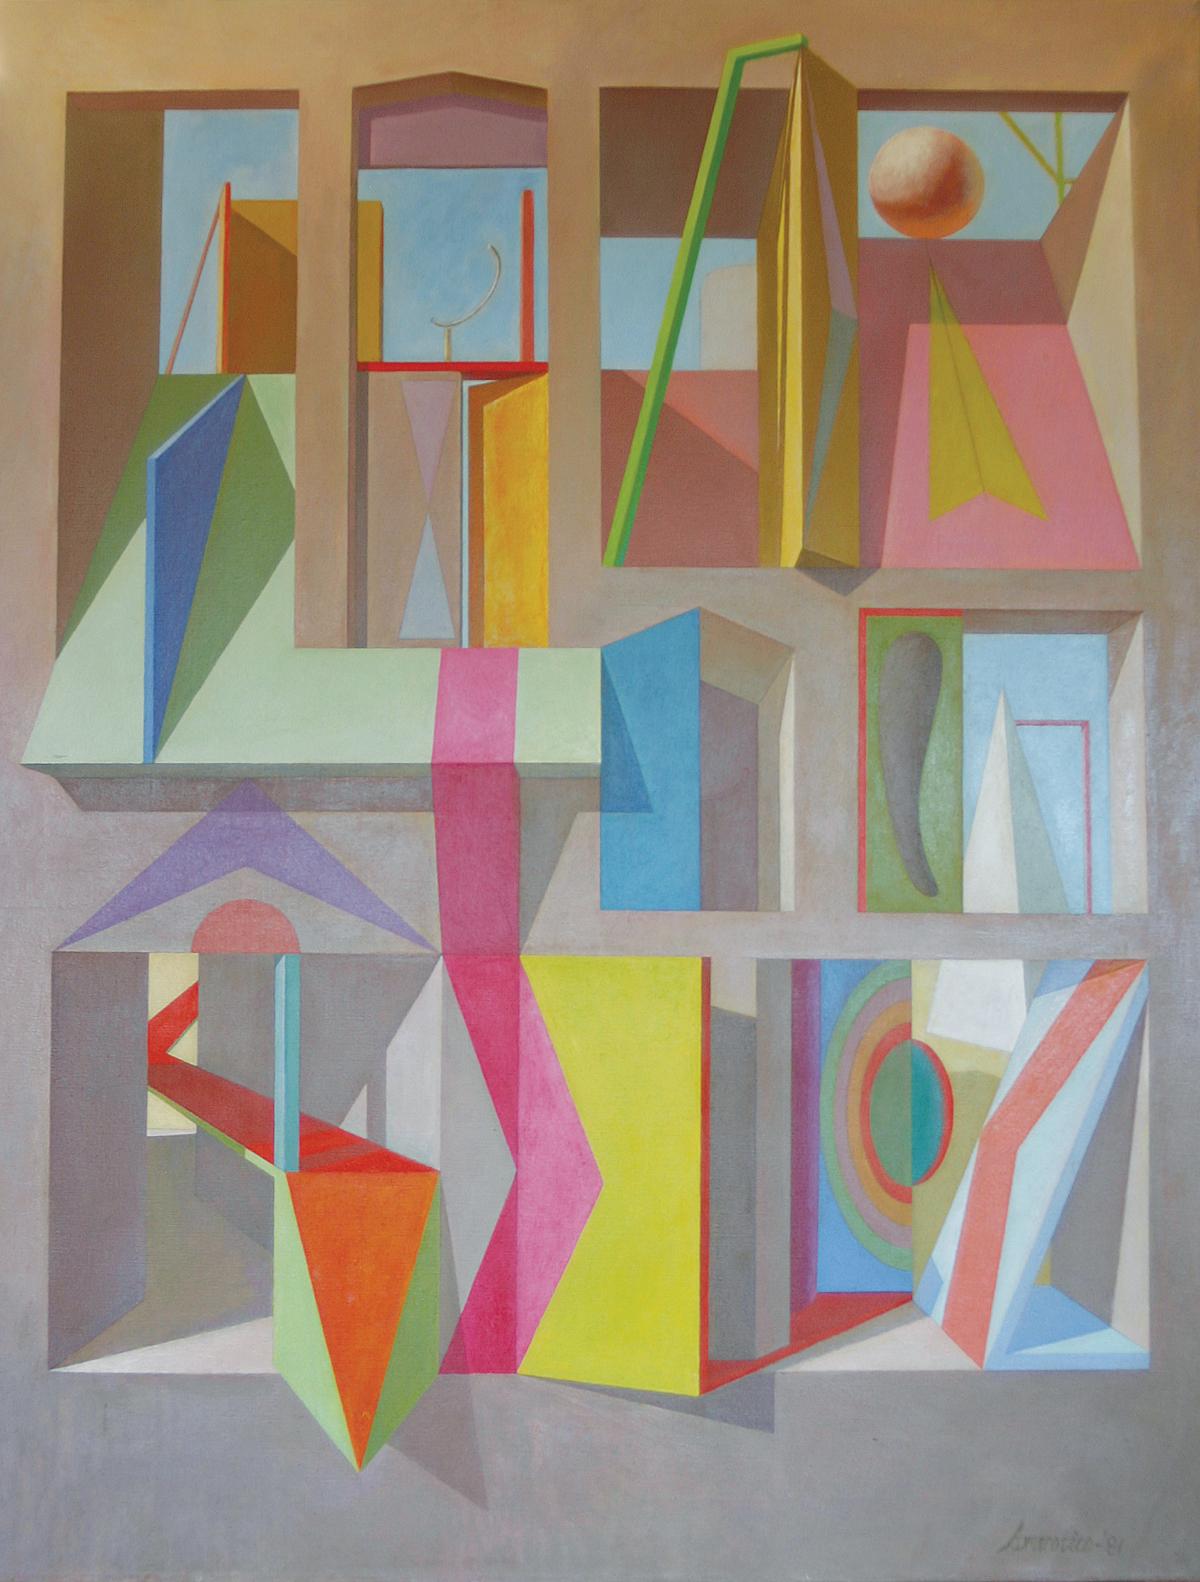 "Architectural Fantasies" by Joseph Amarotico is a 34" x 44" oil on canvas abstract / architectural surrealist painting. It is signed and dated "Amarotico 81" in the lower right and came from a private collection in New Hope, Pennsylvania.